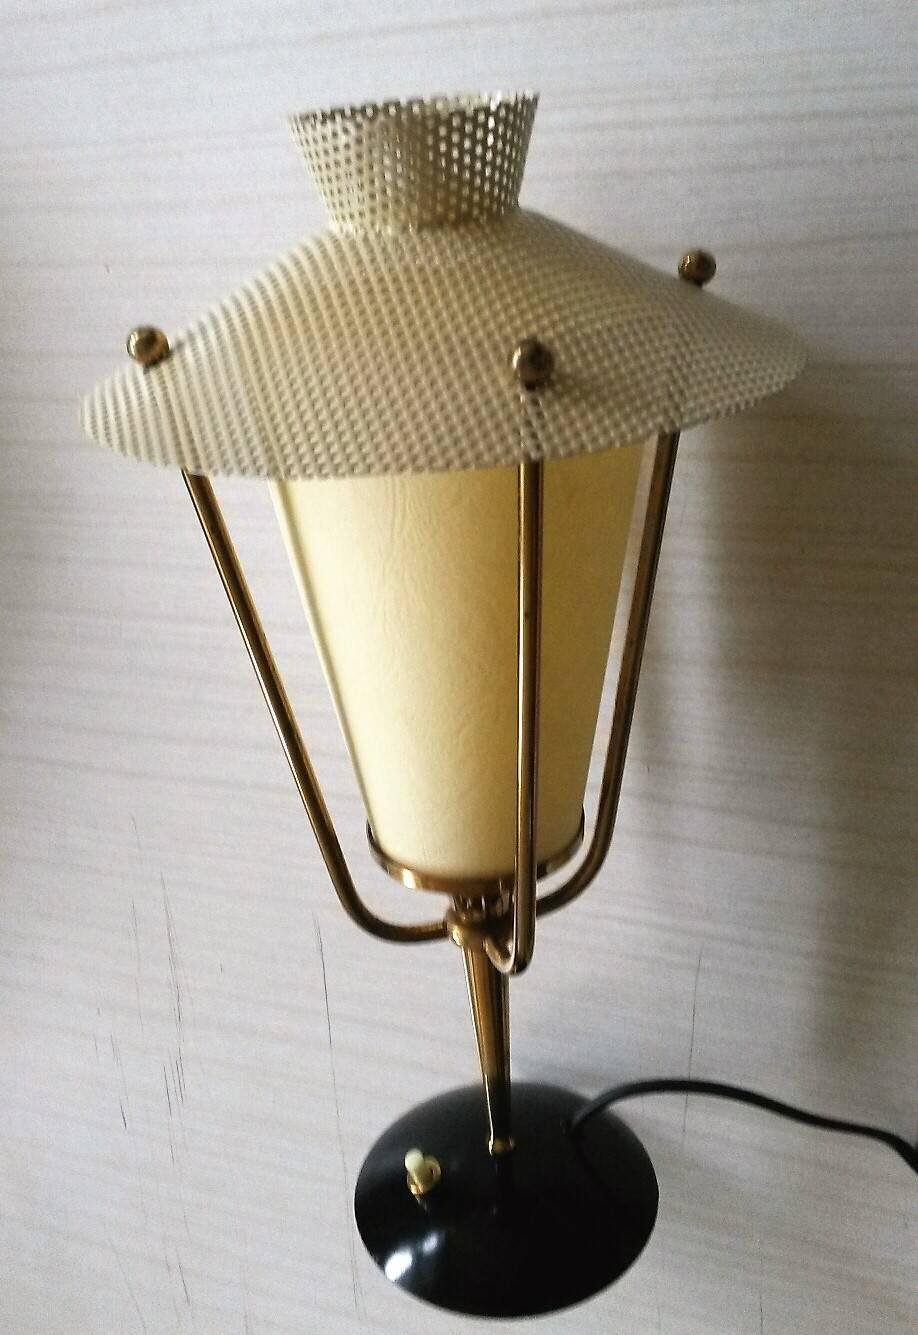 Pair of French table or night lamps by  Maison Arlus, in brass and perforated sheet metal in a great Ivory color and rhodoid lampshades.
France, circa 1950.

Brand new checked and wired, max 40 watts max each.
Dimensions:
Height 34 cm
width 18 cm